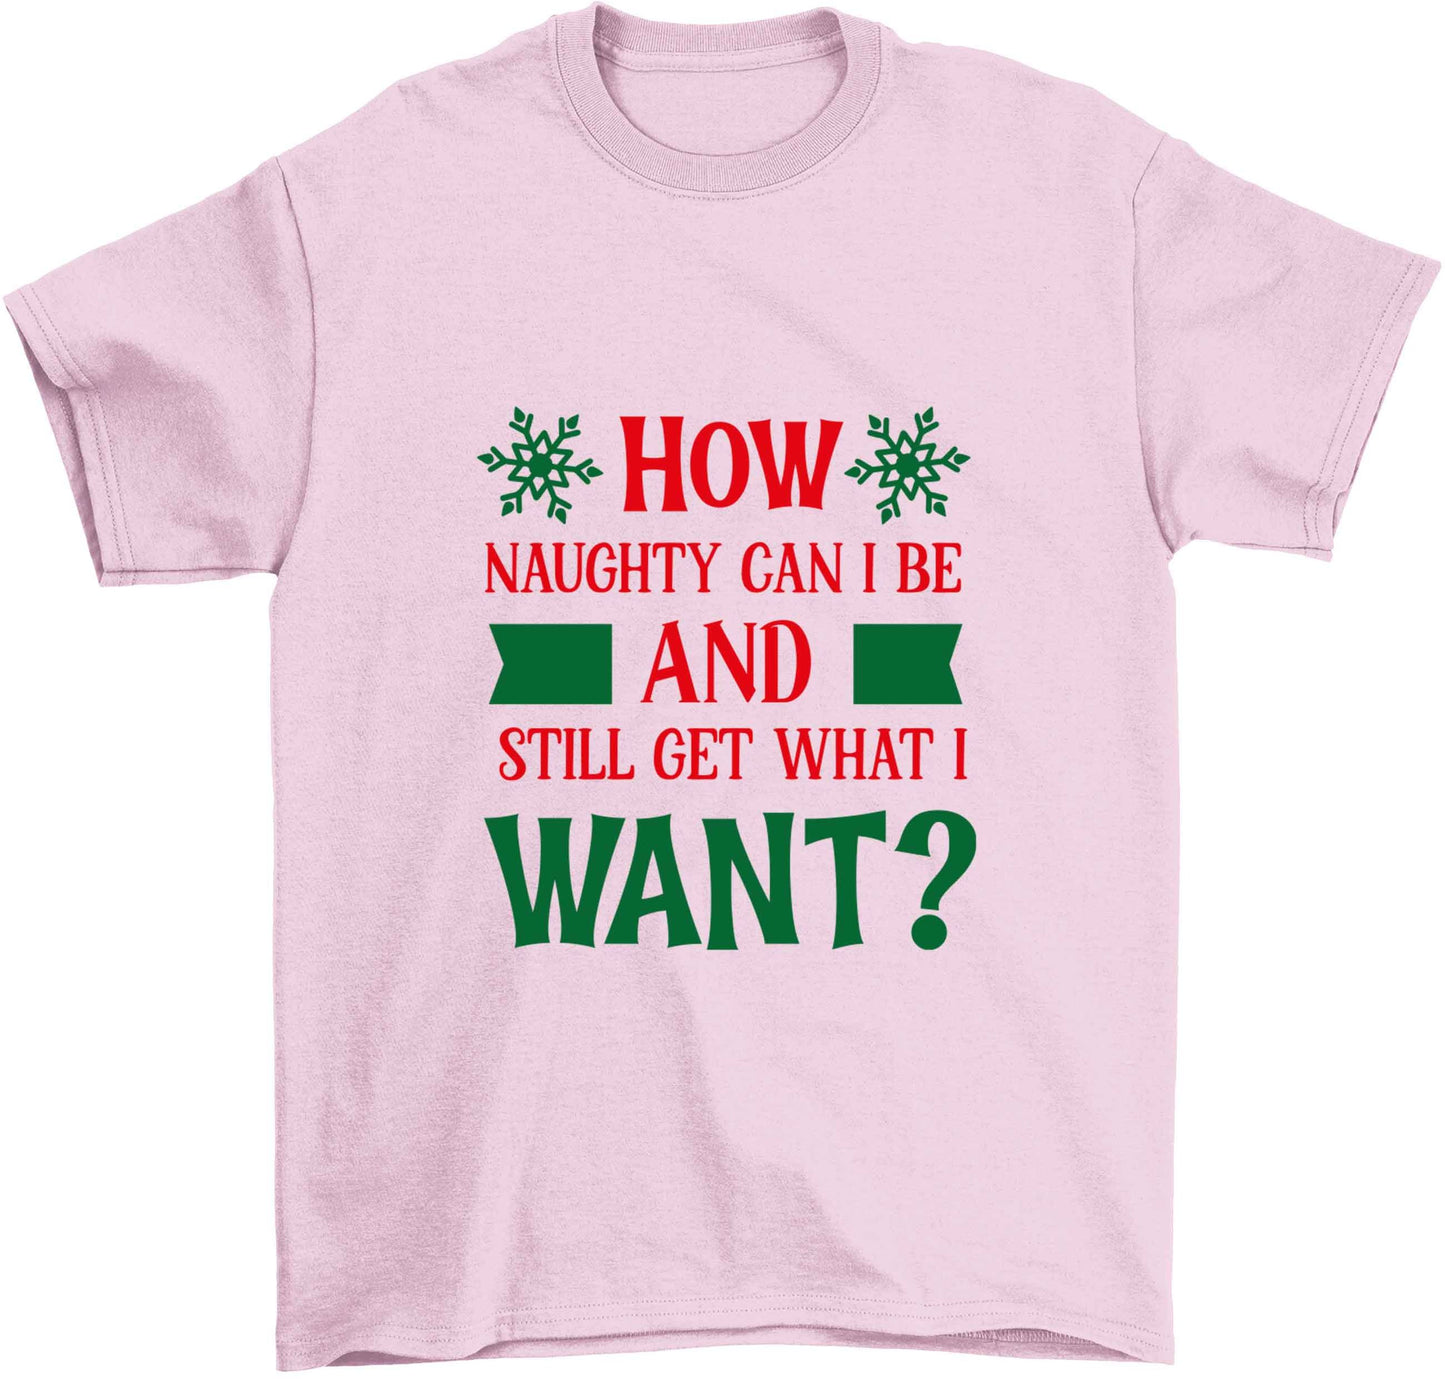 How naughty can I be and still get what I want? Children's light pink Tshirt 12-13 Years